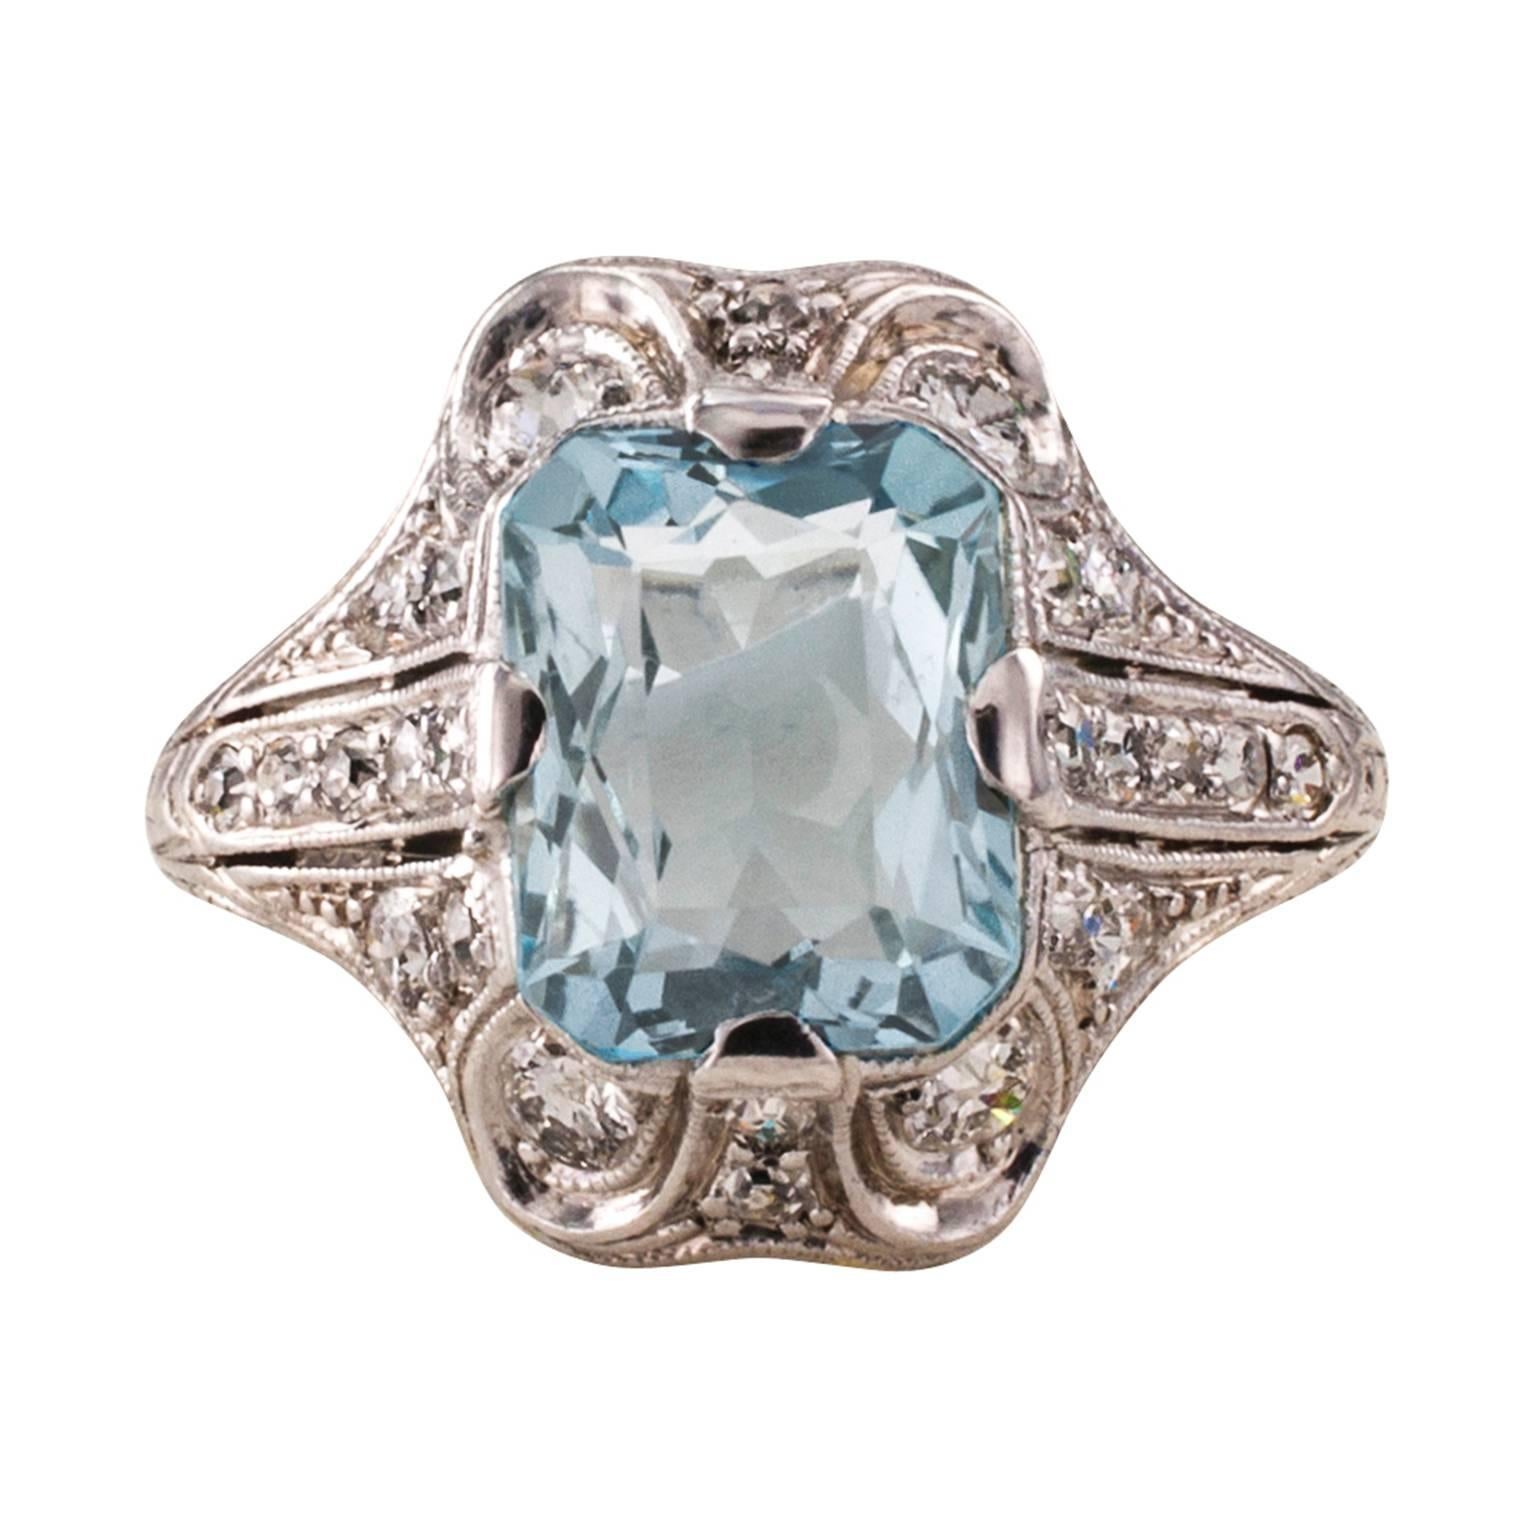 Bailey Banks and Biddle Estate Aquamarine and Diamond Art Deco Ring

A lovely treasure from the past to grace the finger of a fortunate lady.  The ring is very pristine, not to mention beautiful.  The Art Deco platinum mount showcasing an